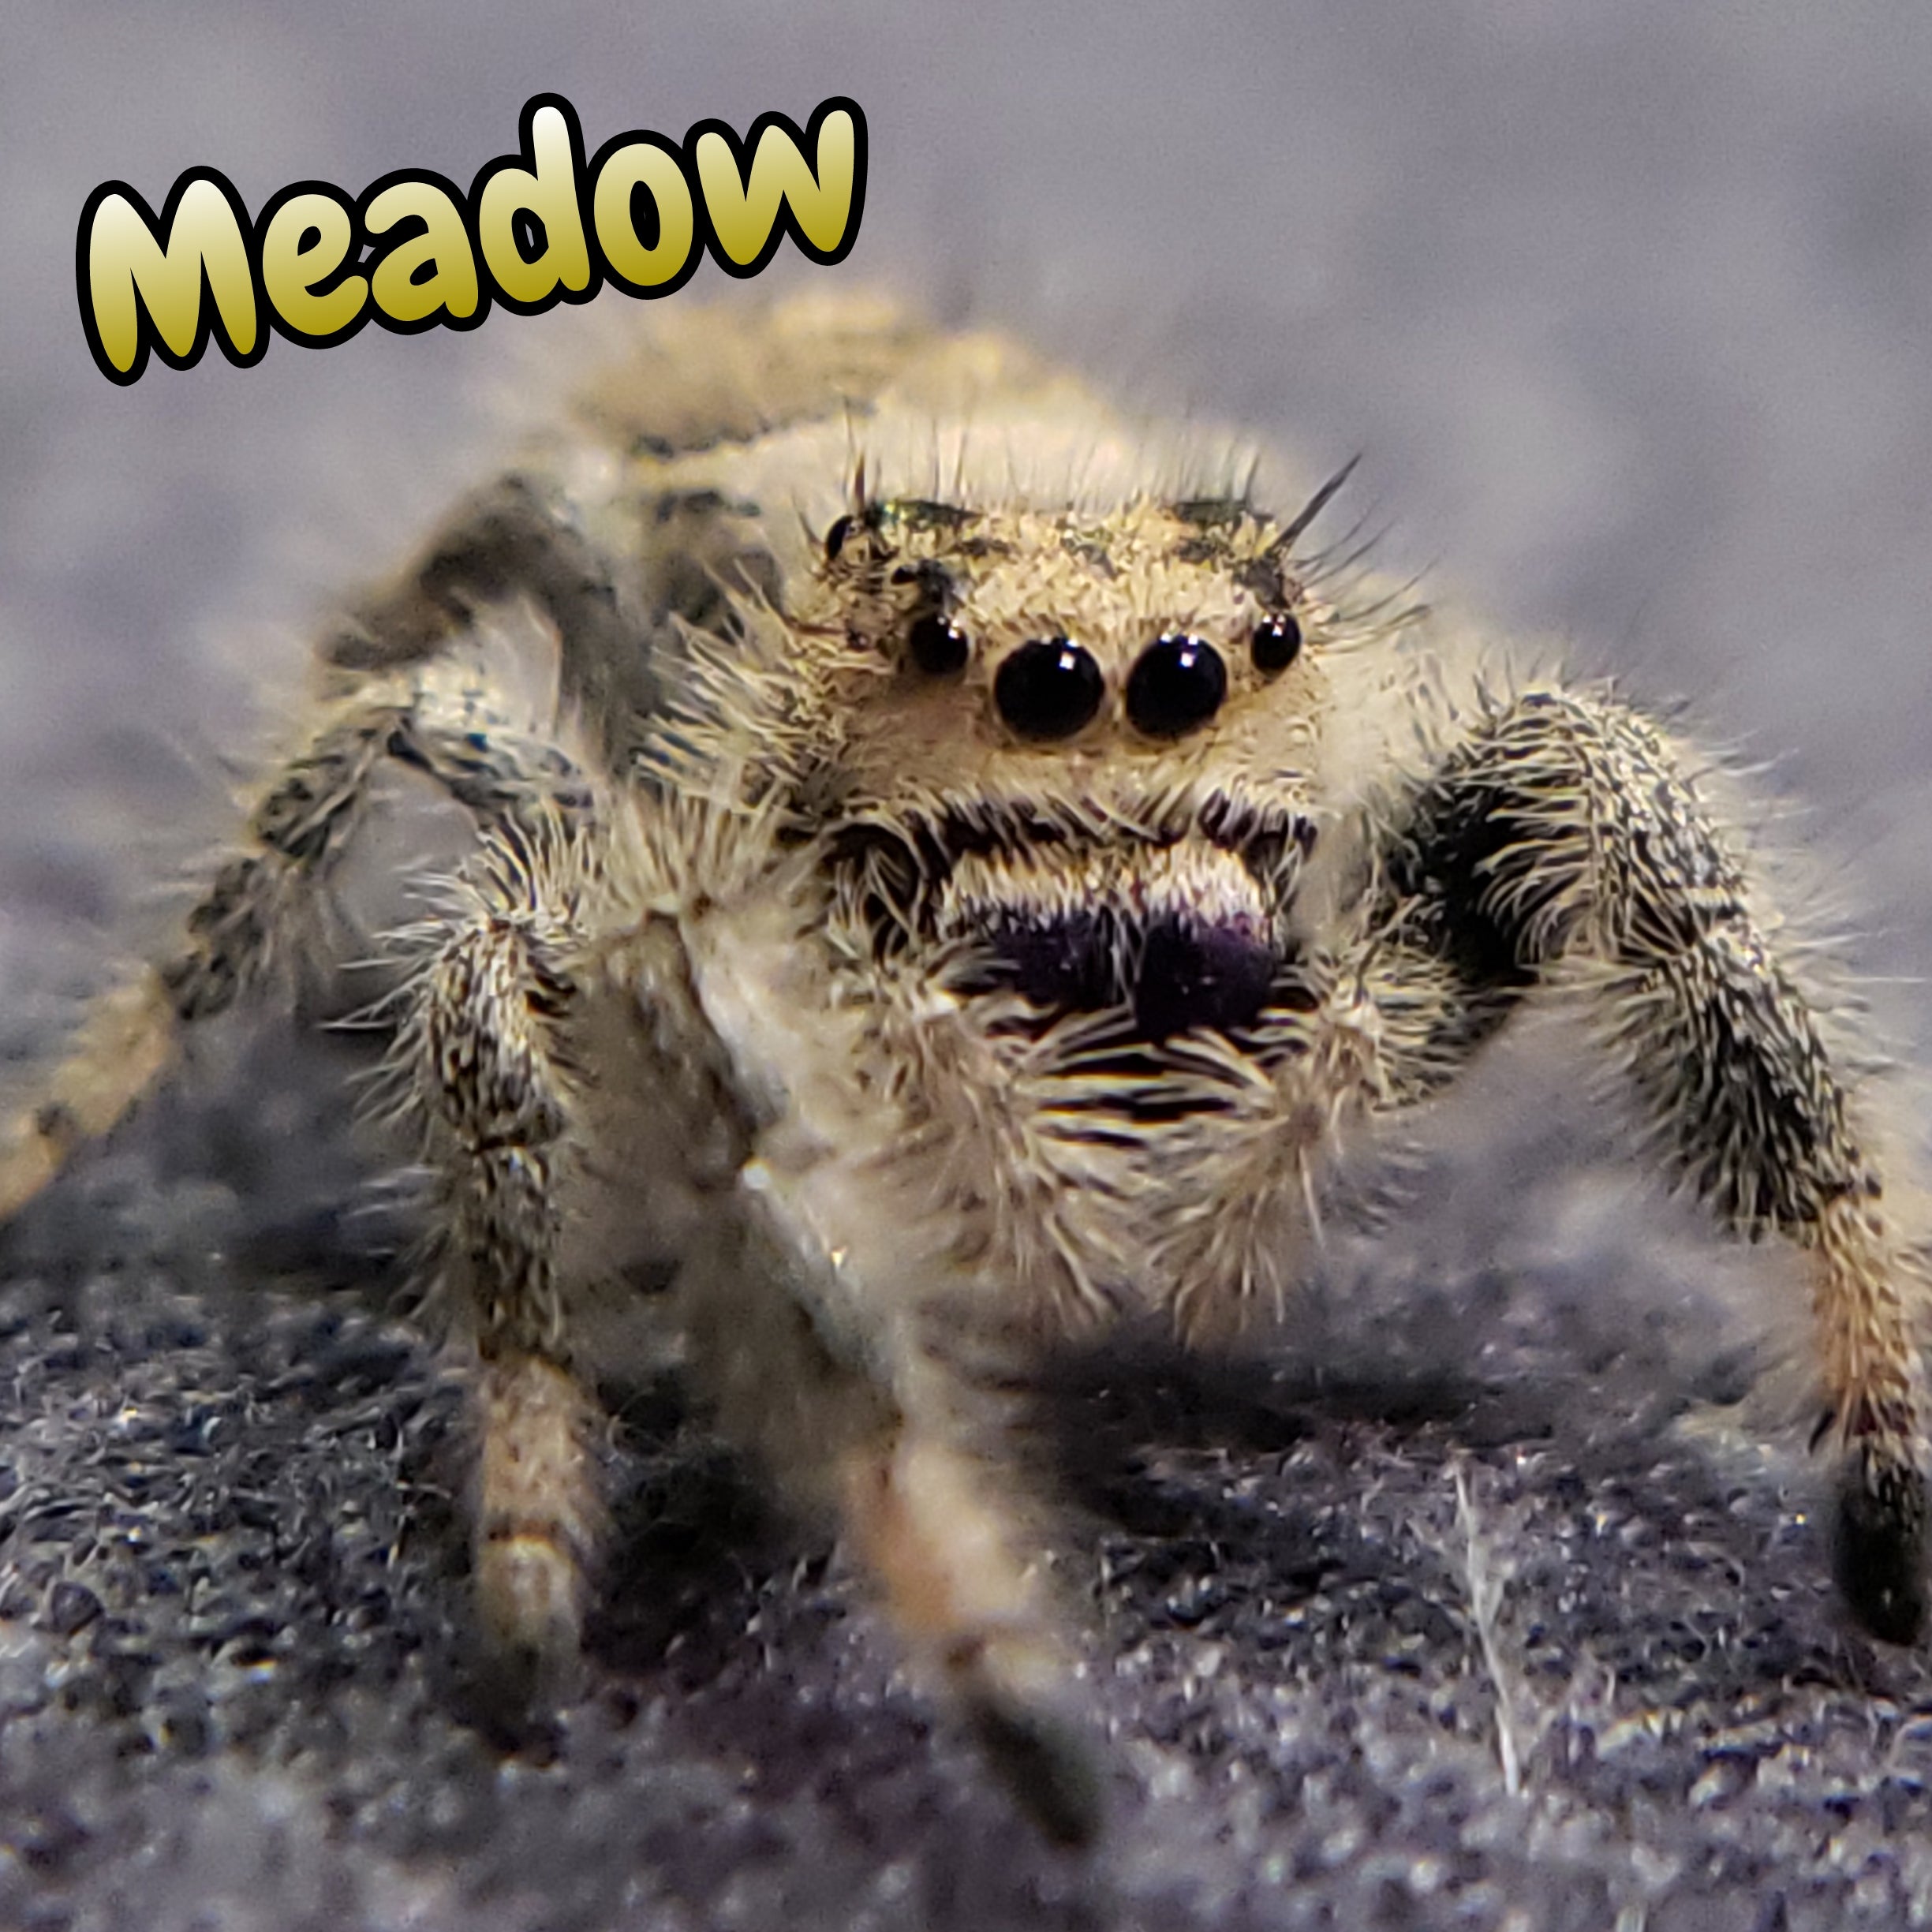 Regal Jumping Spider "Meadow"